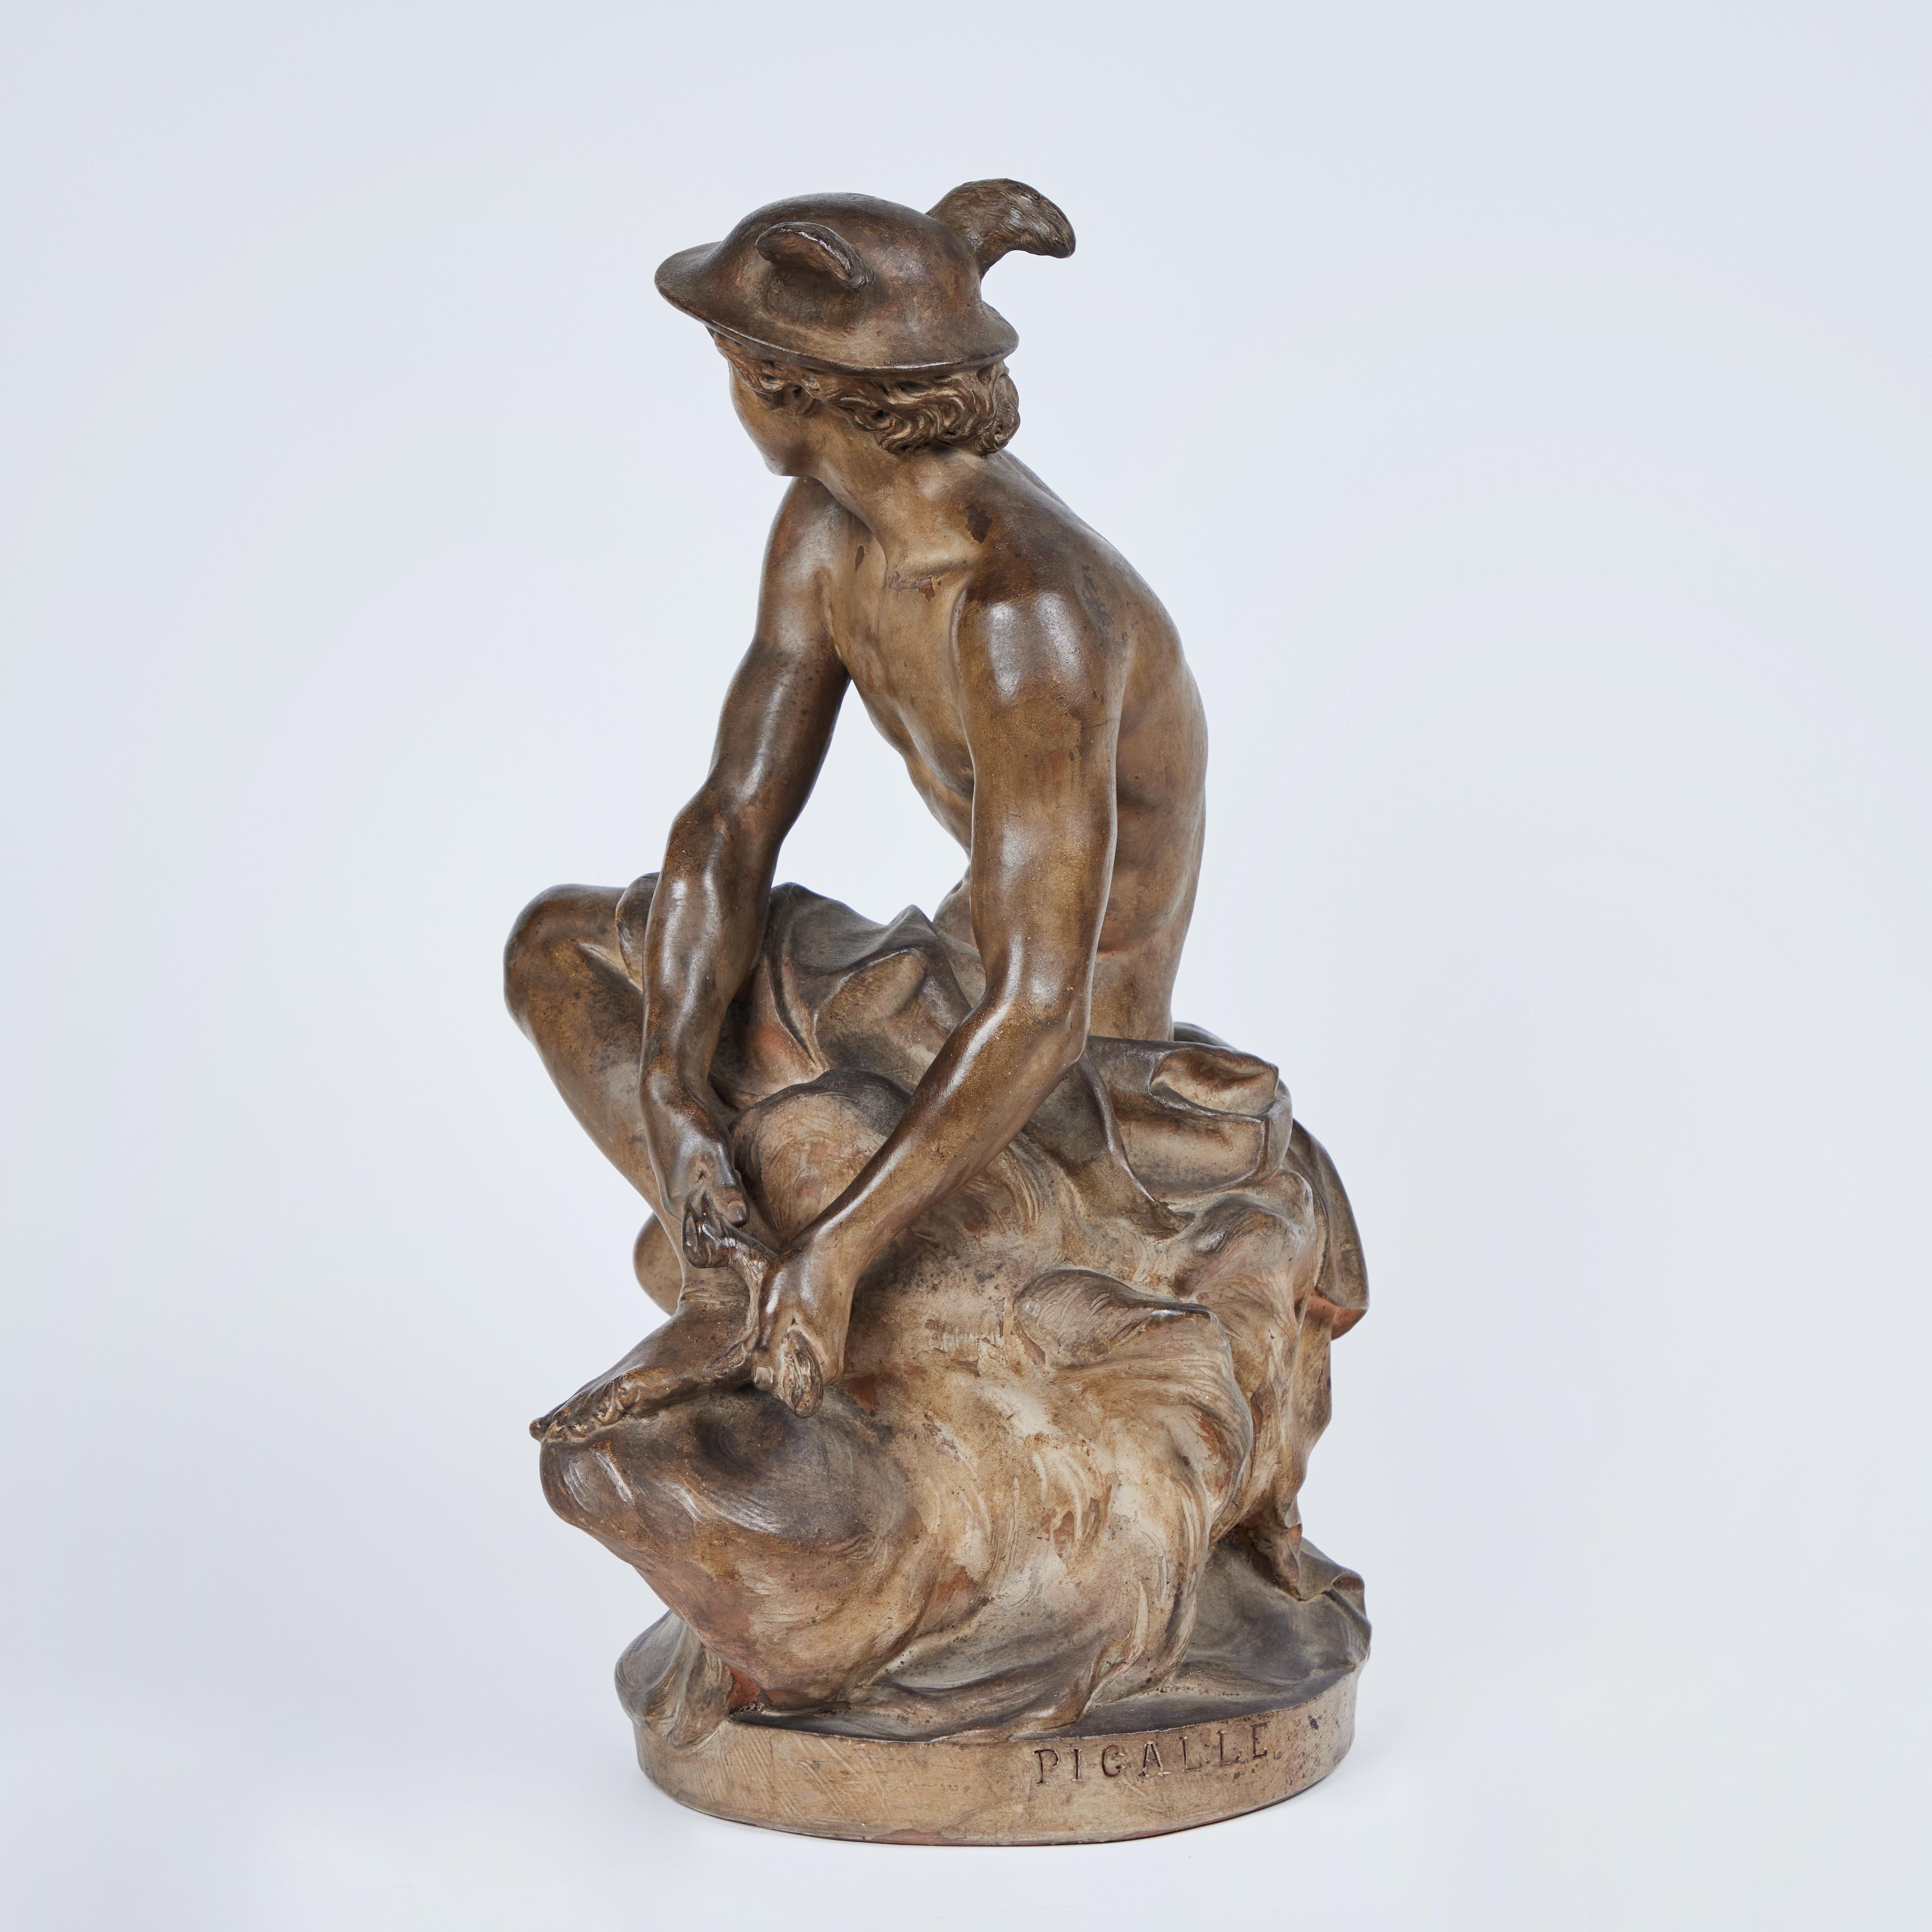 unknown - Brown Figurative Sculpture by Jean-Baptiste Pigalle